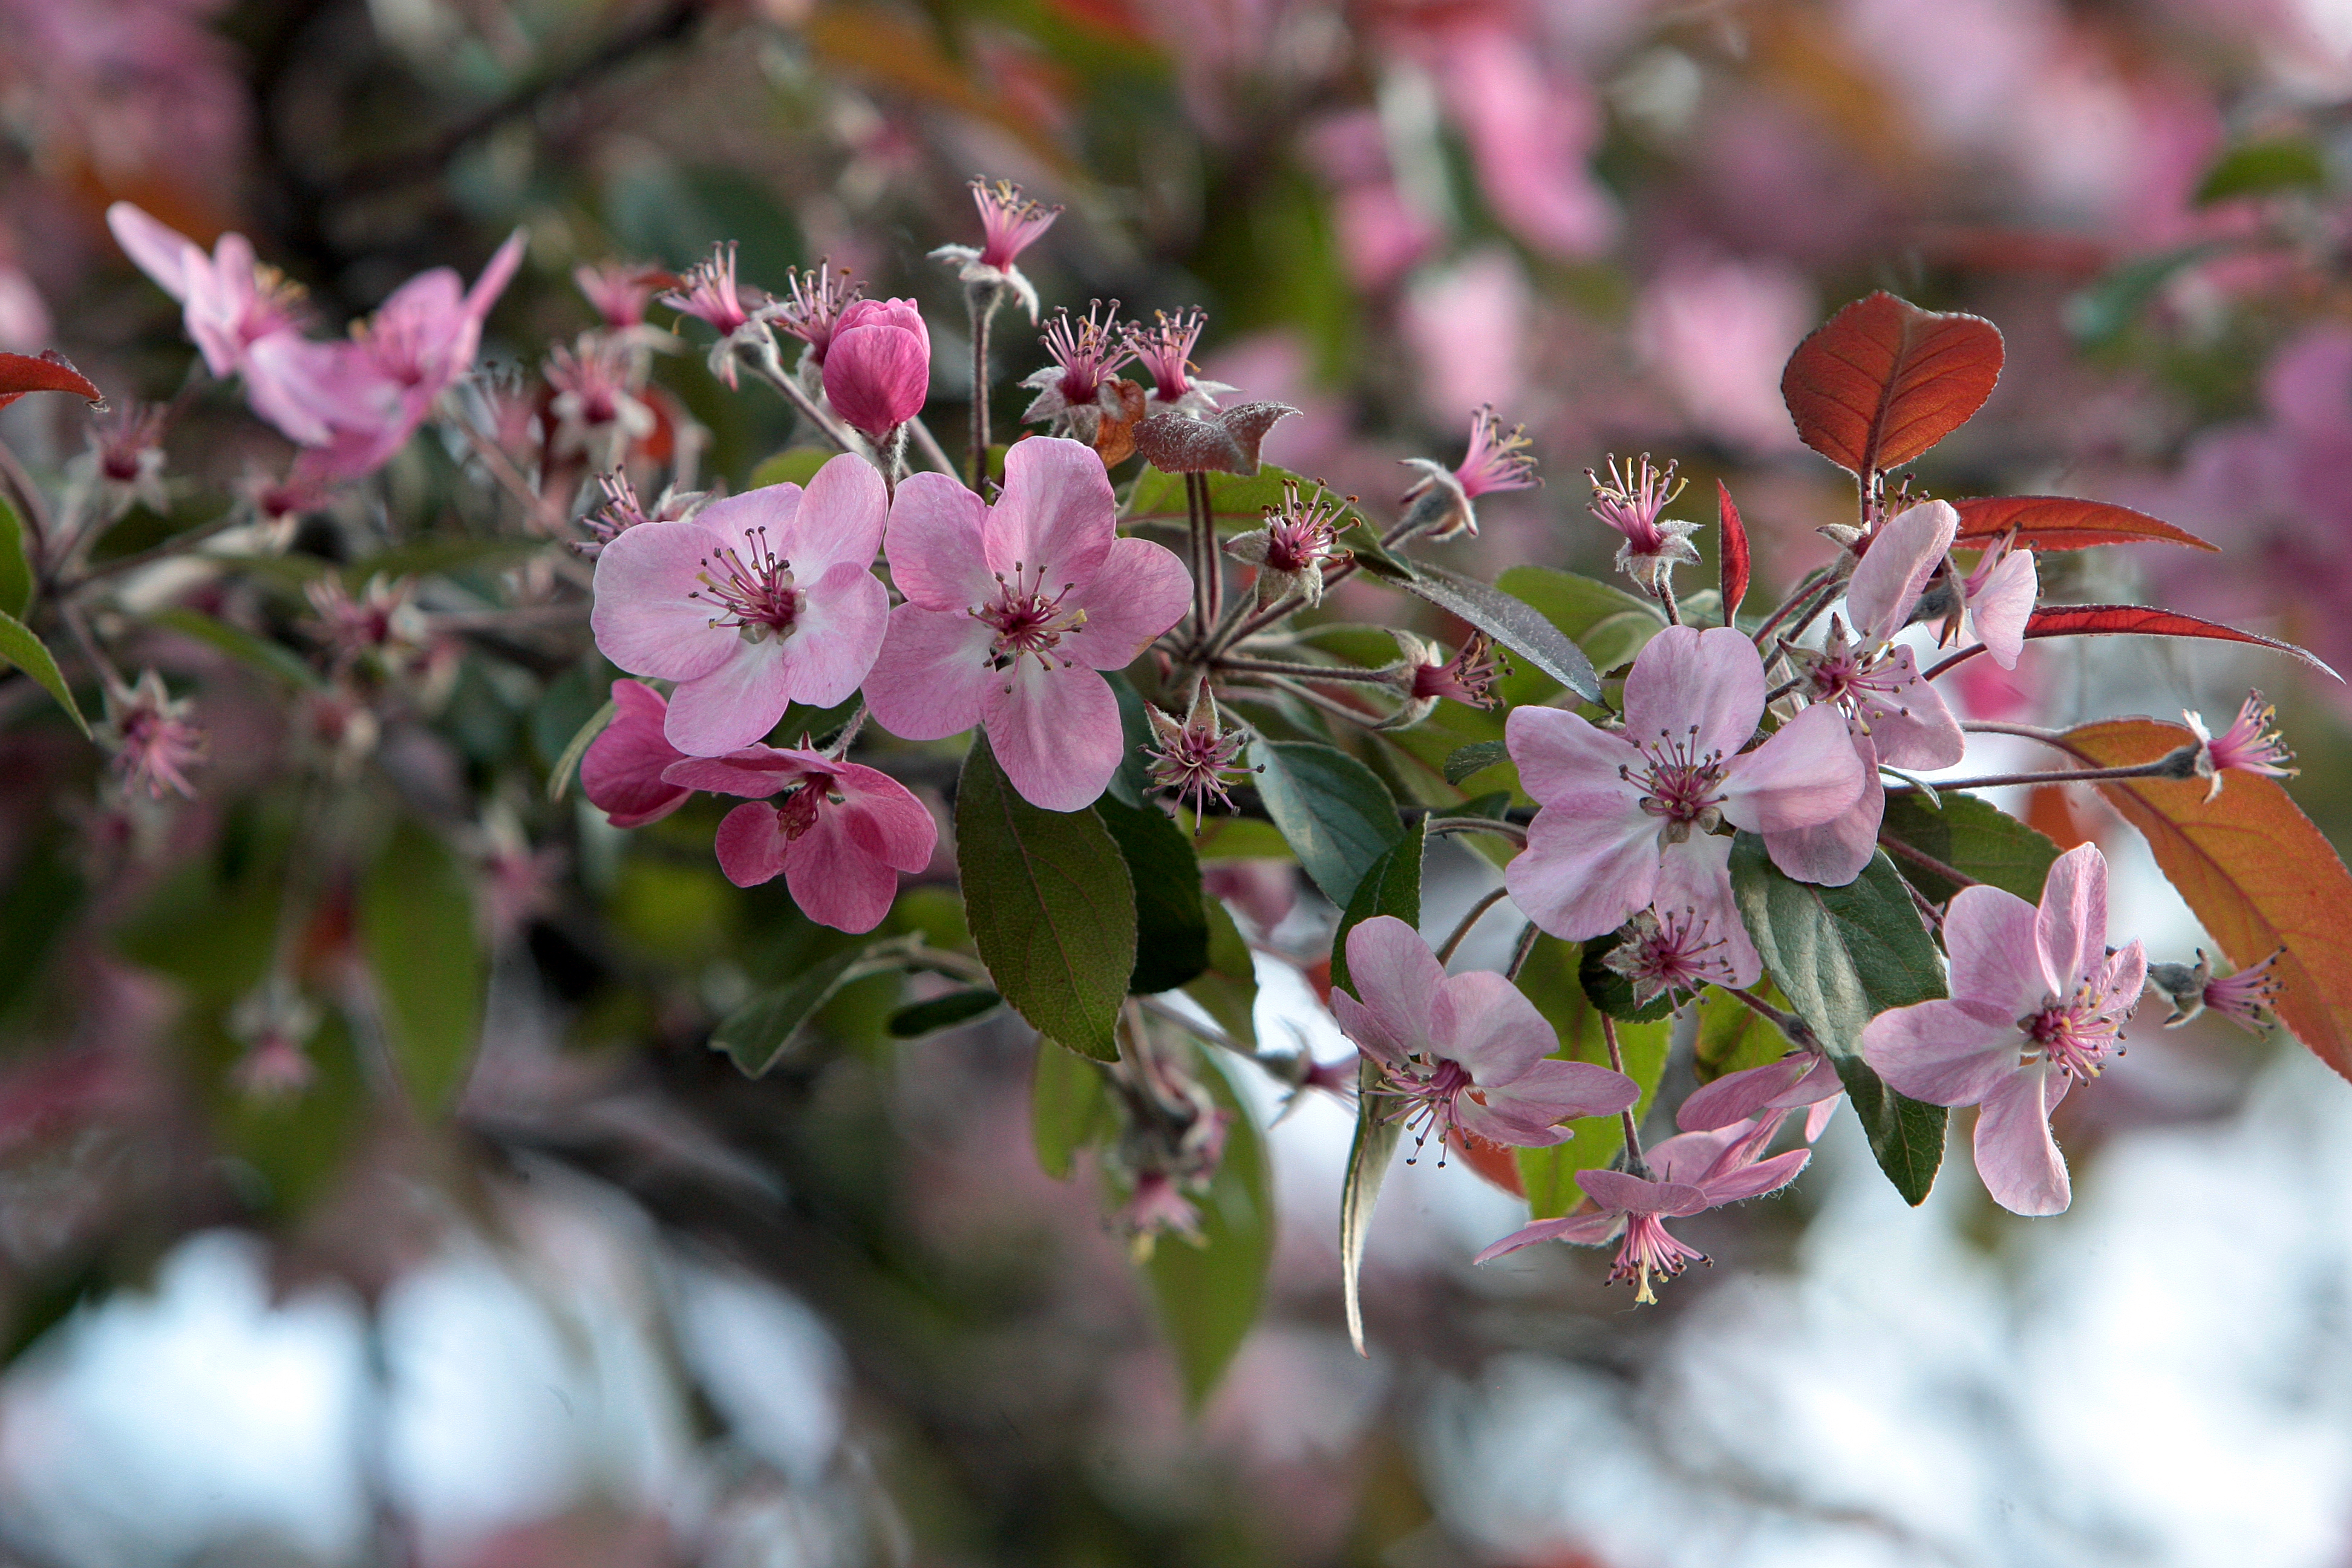 A branch of apple blossom flowers